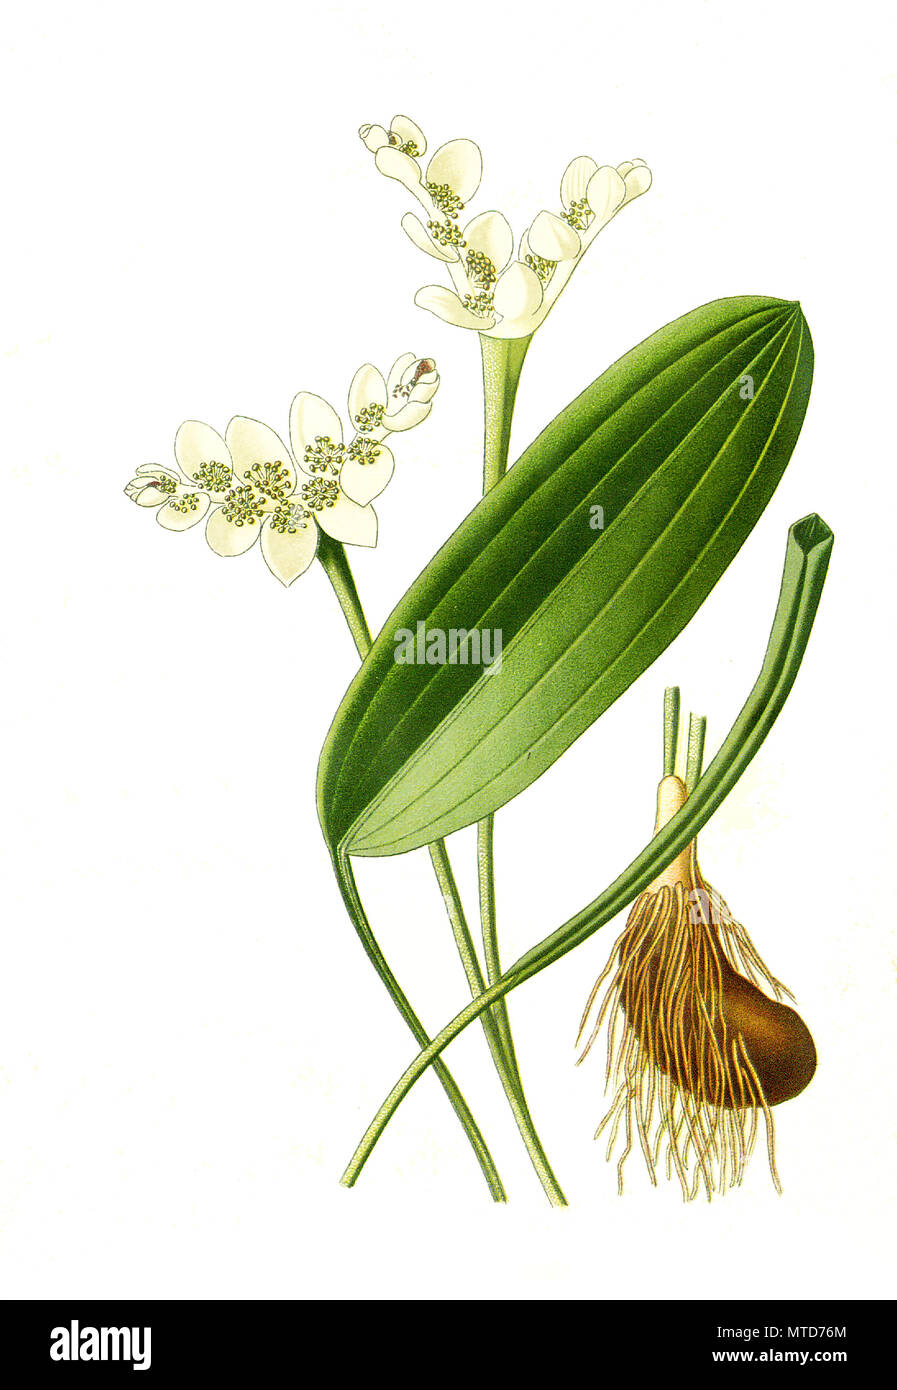 Aponogeton distachyum, Aponogeton distachyos, Cape Pond-Weed, waterblommetjie, Cape-pondweed, water hawthorn, vleikos. ZweiÃ¤hrige WasserÃ¤hre, digital improved reproduction from a print of the 19th century Stock Photo